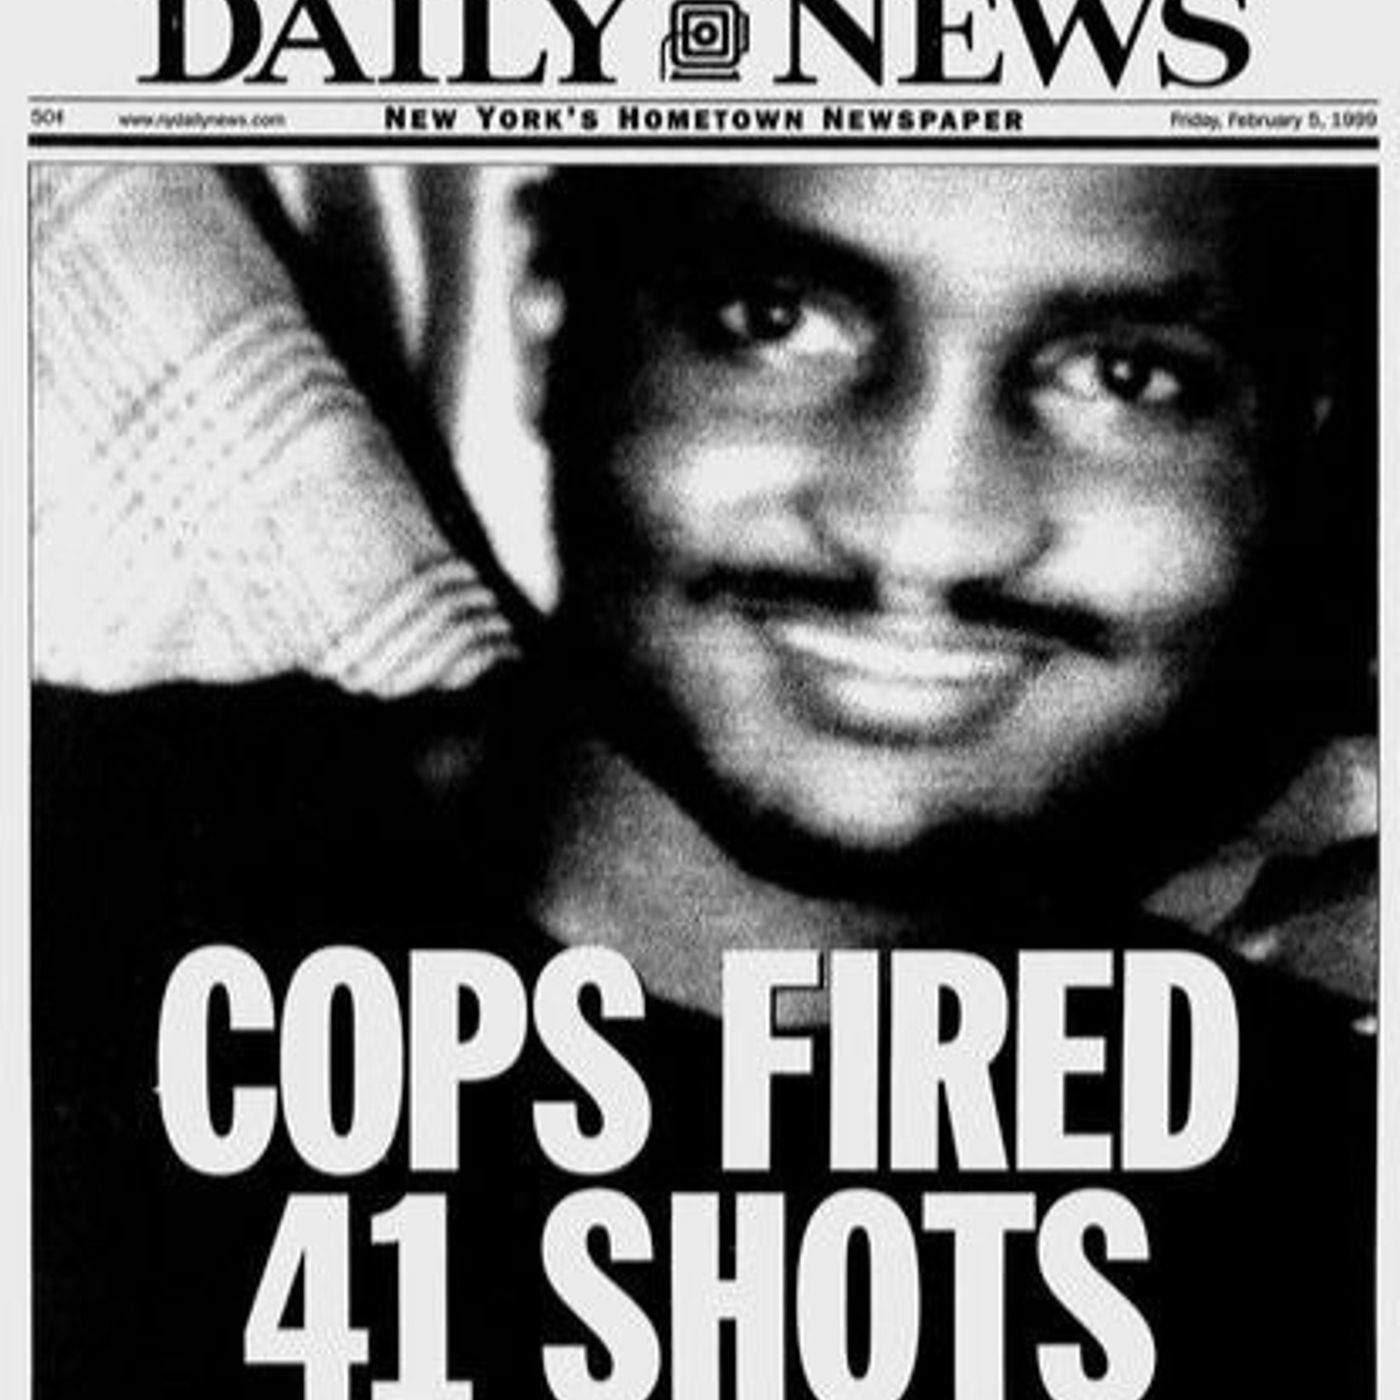 142: 41 Shots: The Killing of Amadou Diallo (Trial By Media Episode 3) by Obsessed Network